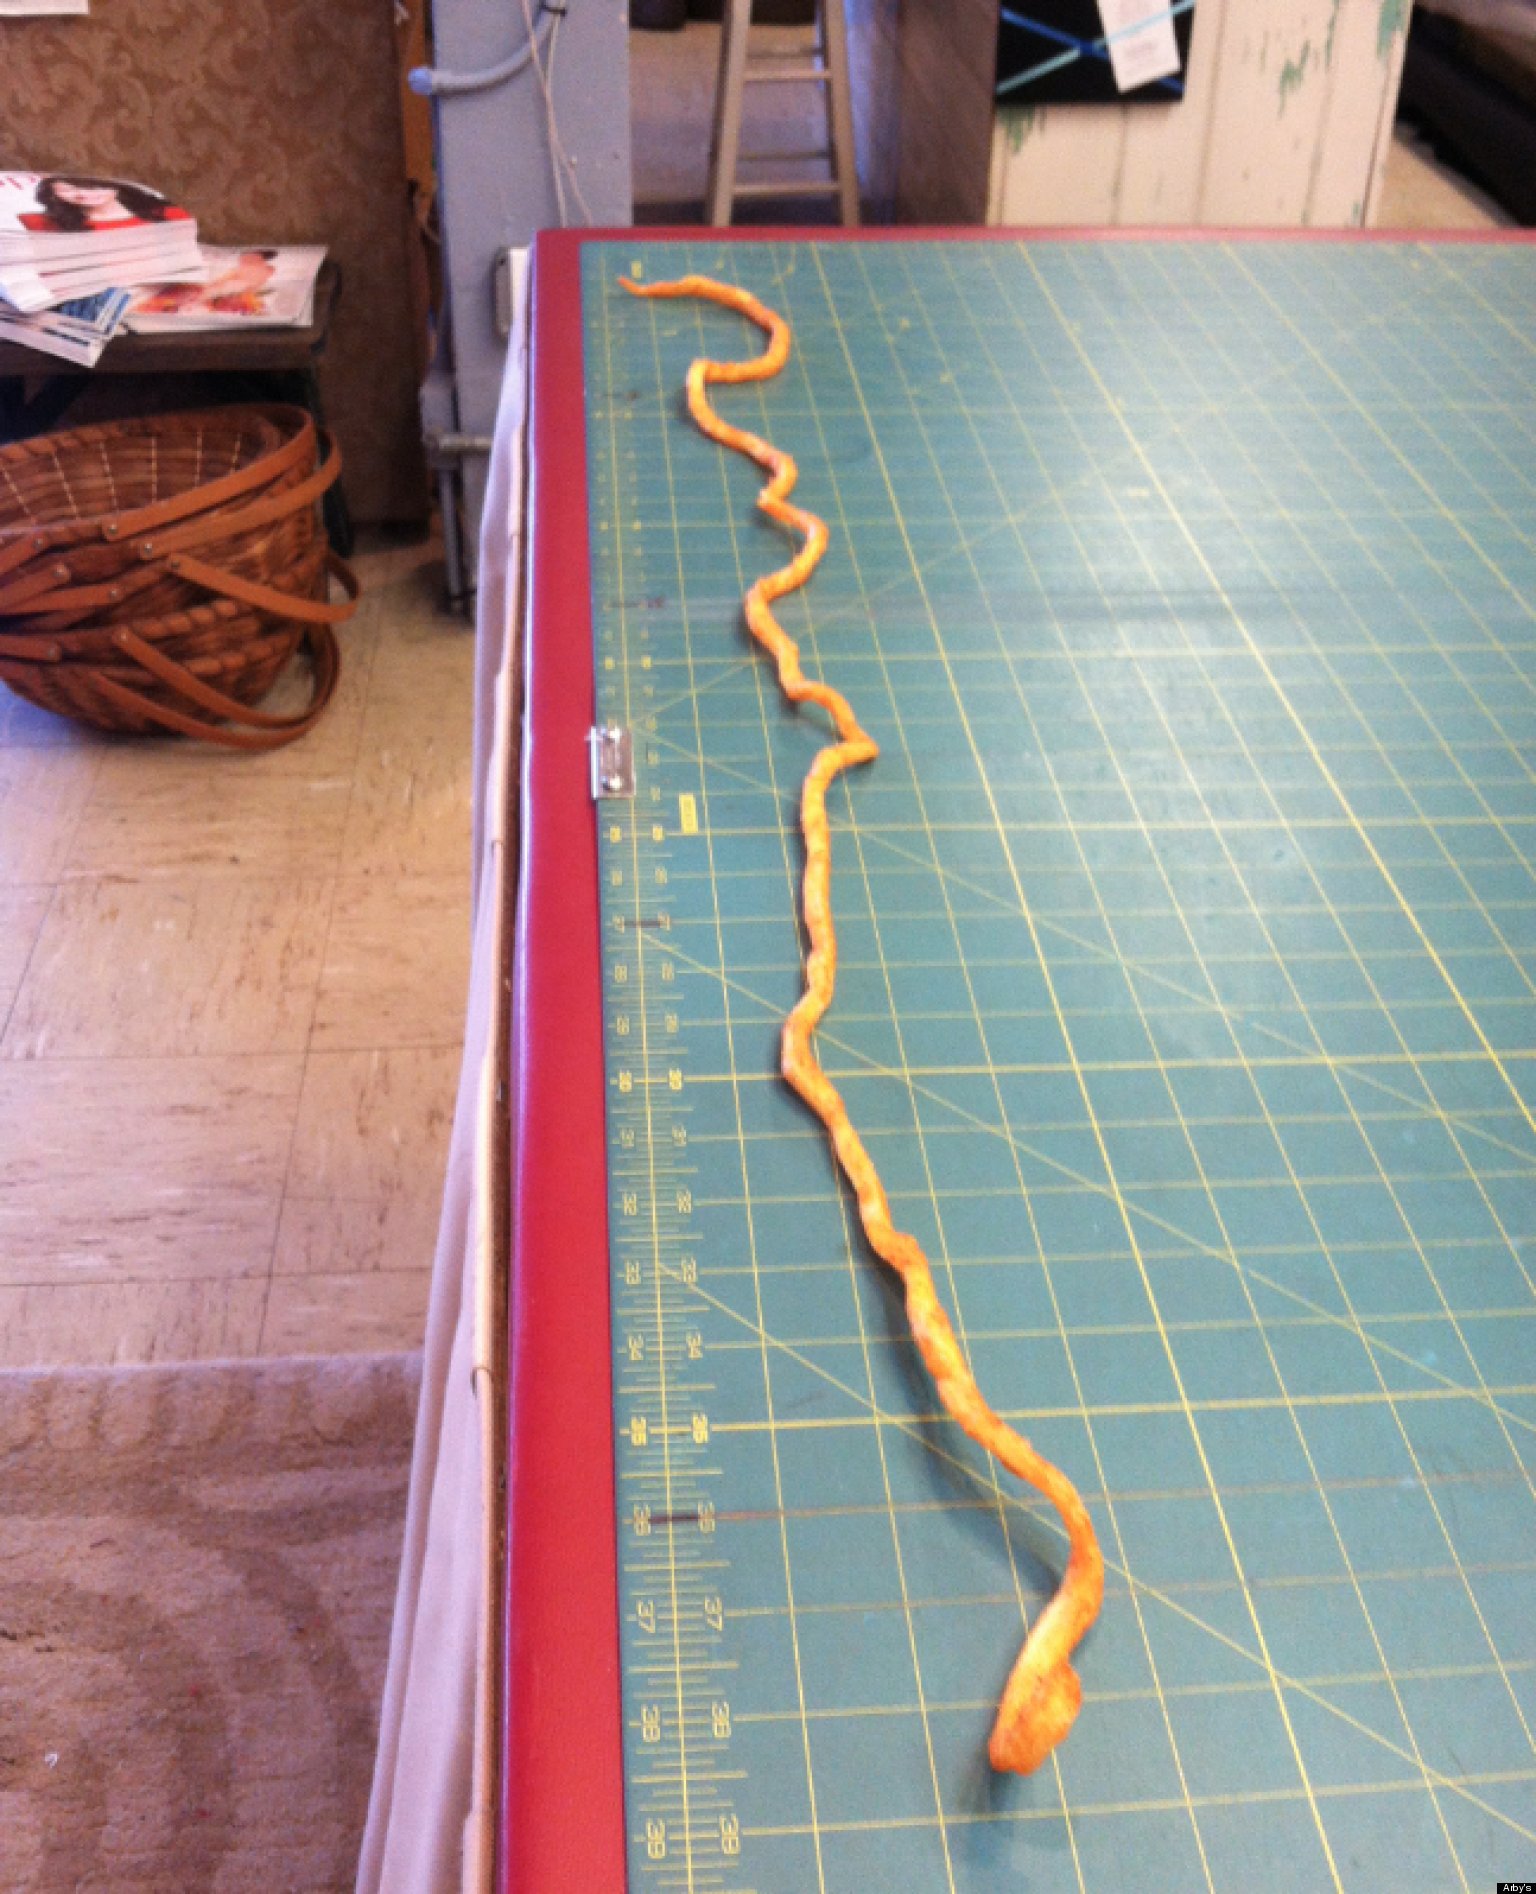 World's Longest Curly Fry: Arby's Customer Kim Medford Discovers 38